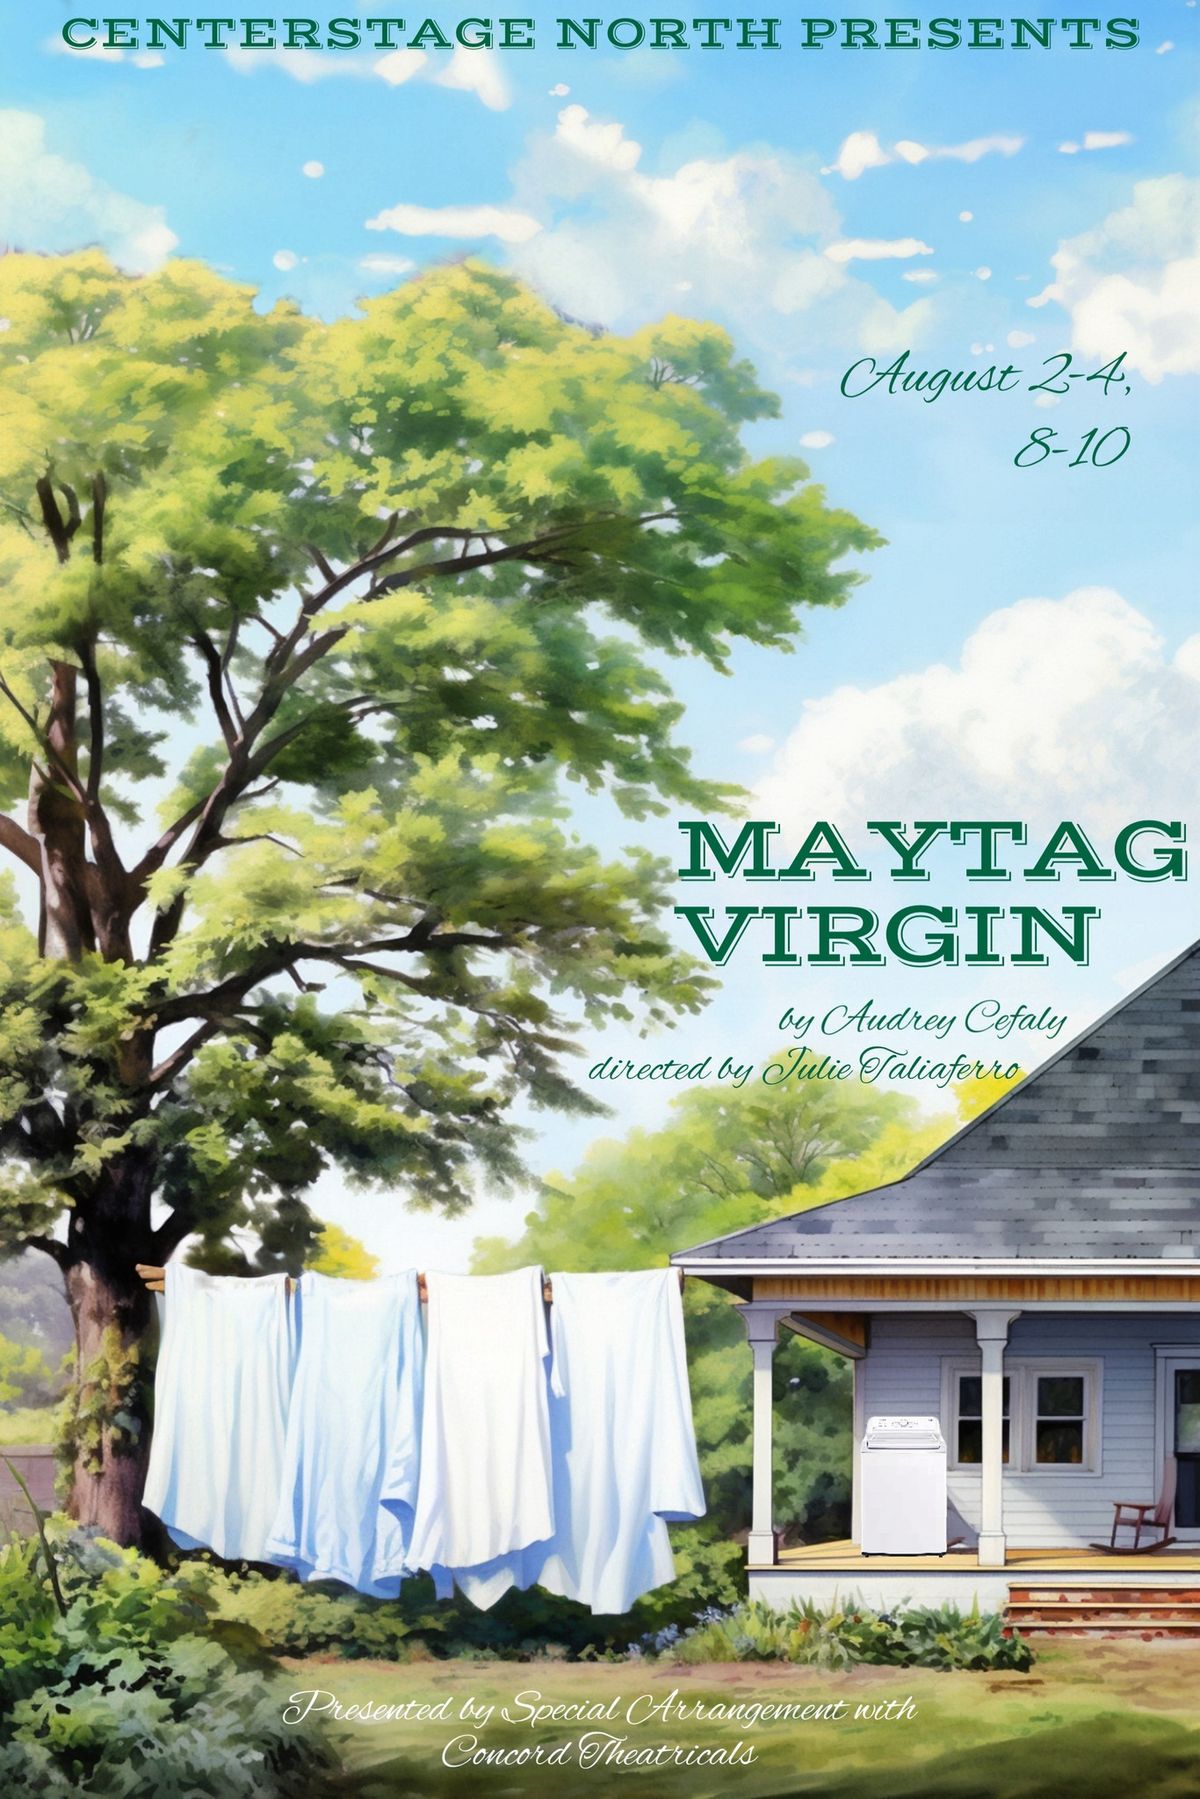 Auditions For Maytag Virgin by Audrey Cefaly